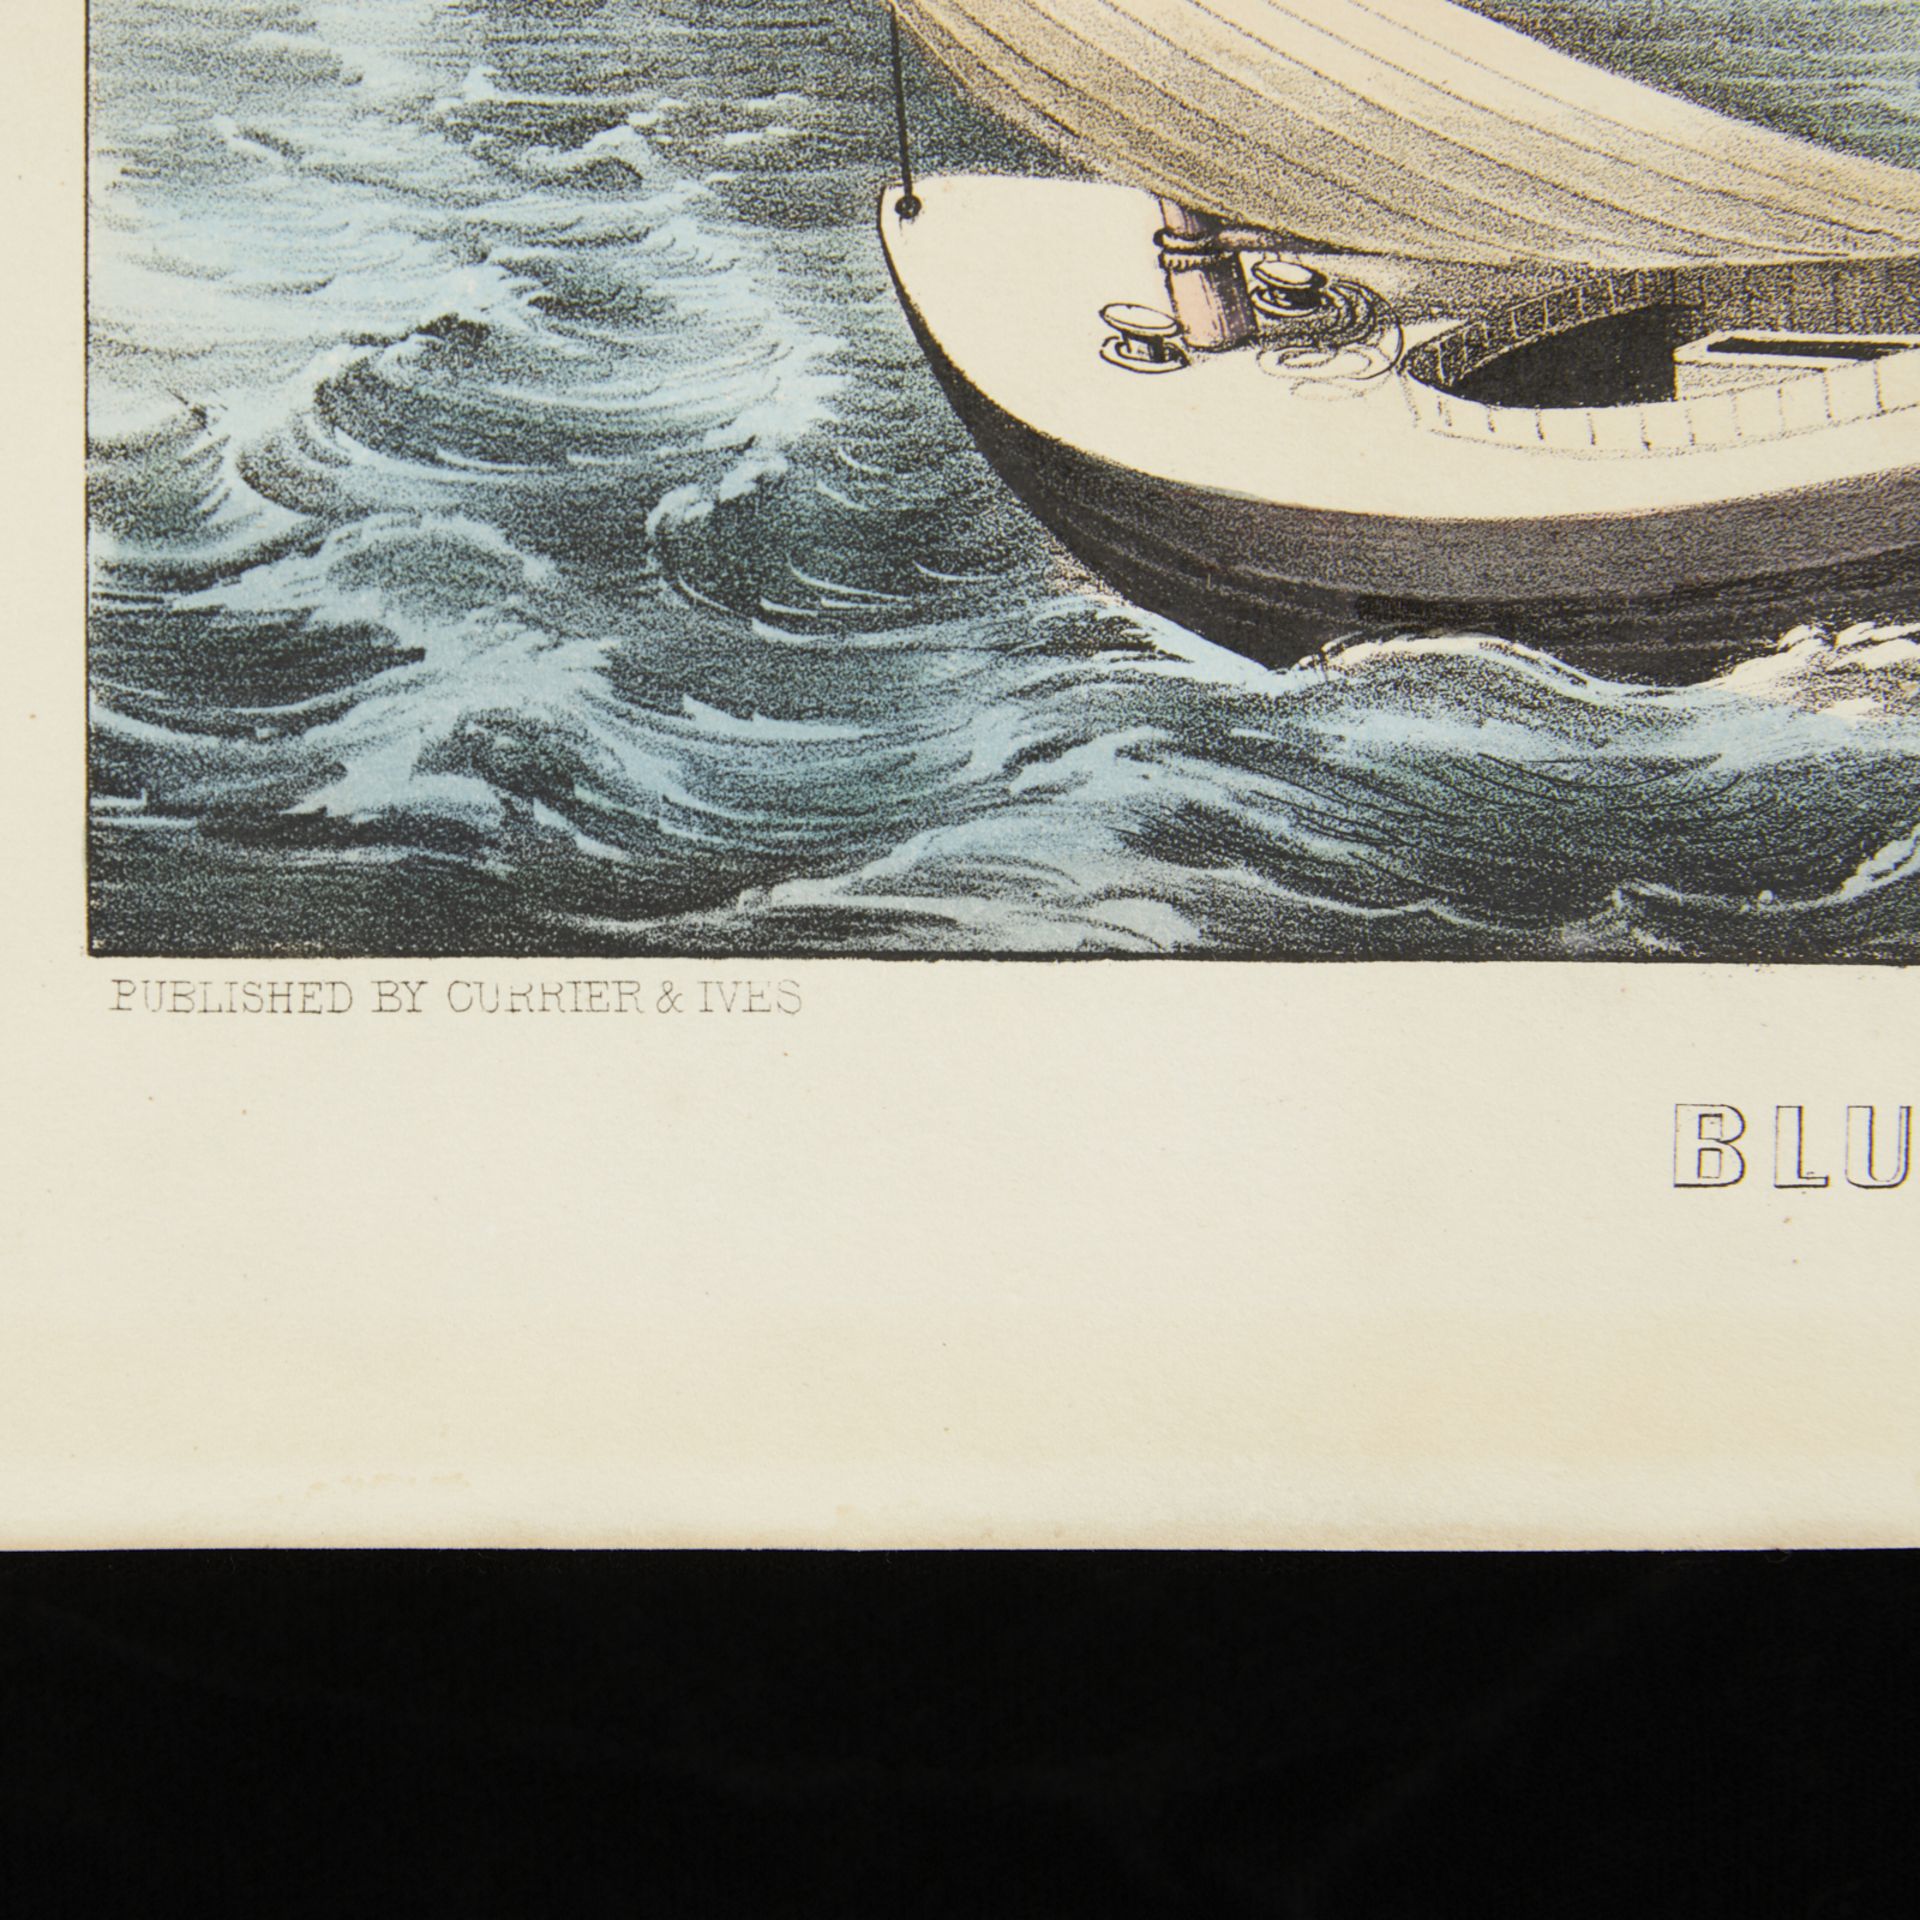 Currier & Ives "Blue Fishing" Print - Image 4 of 8